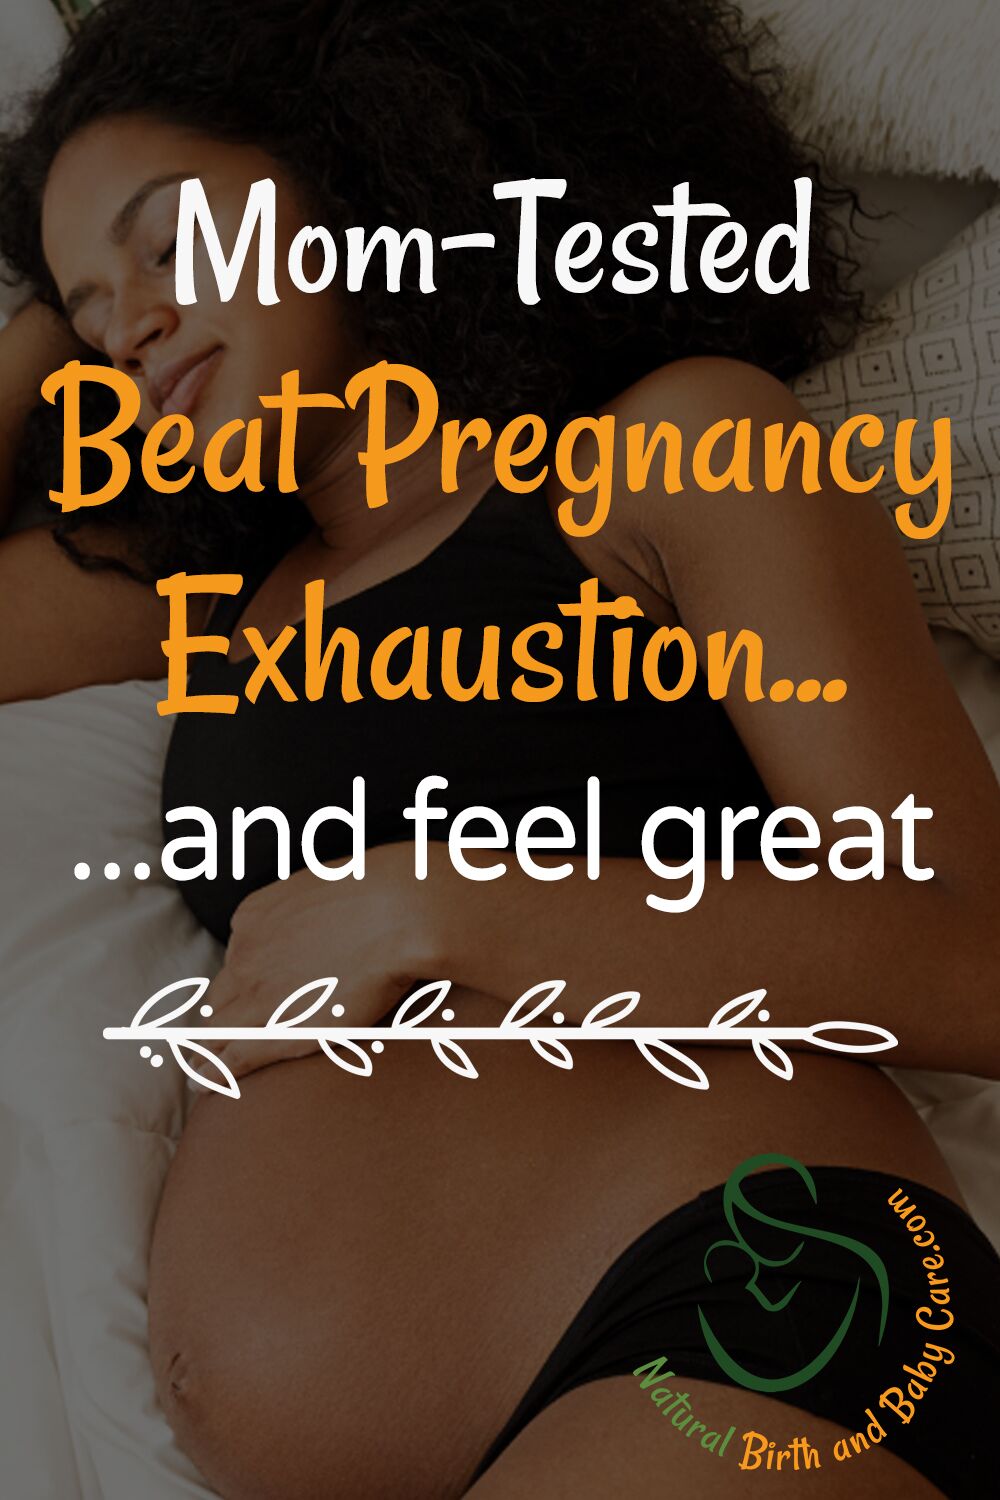 Sleeping pregnant mom with mom-tested beat pregnancy exhaustion text superimposed